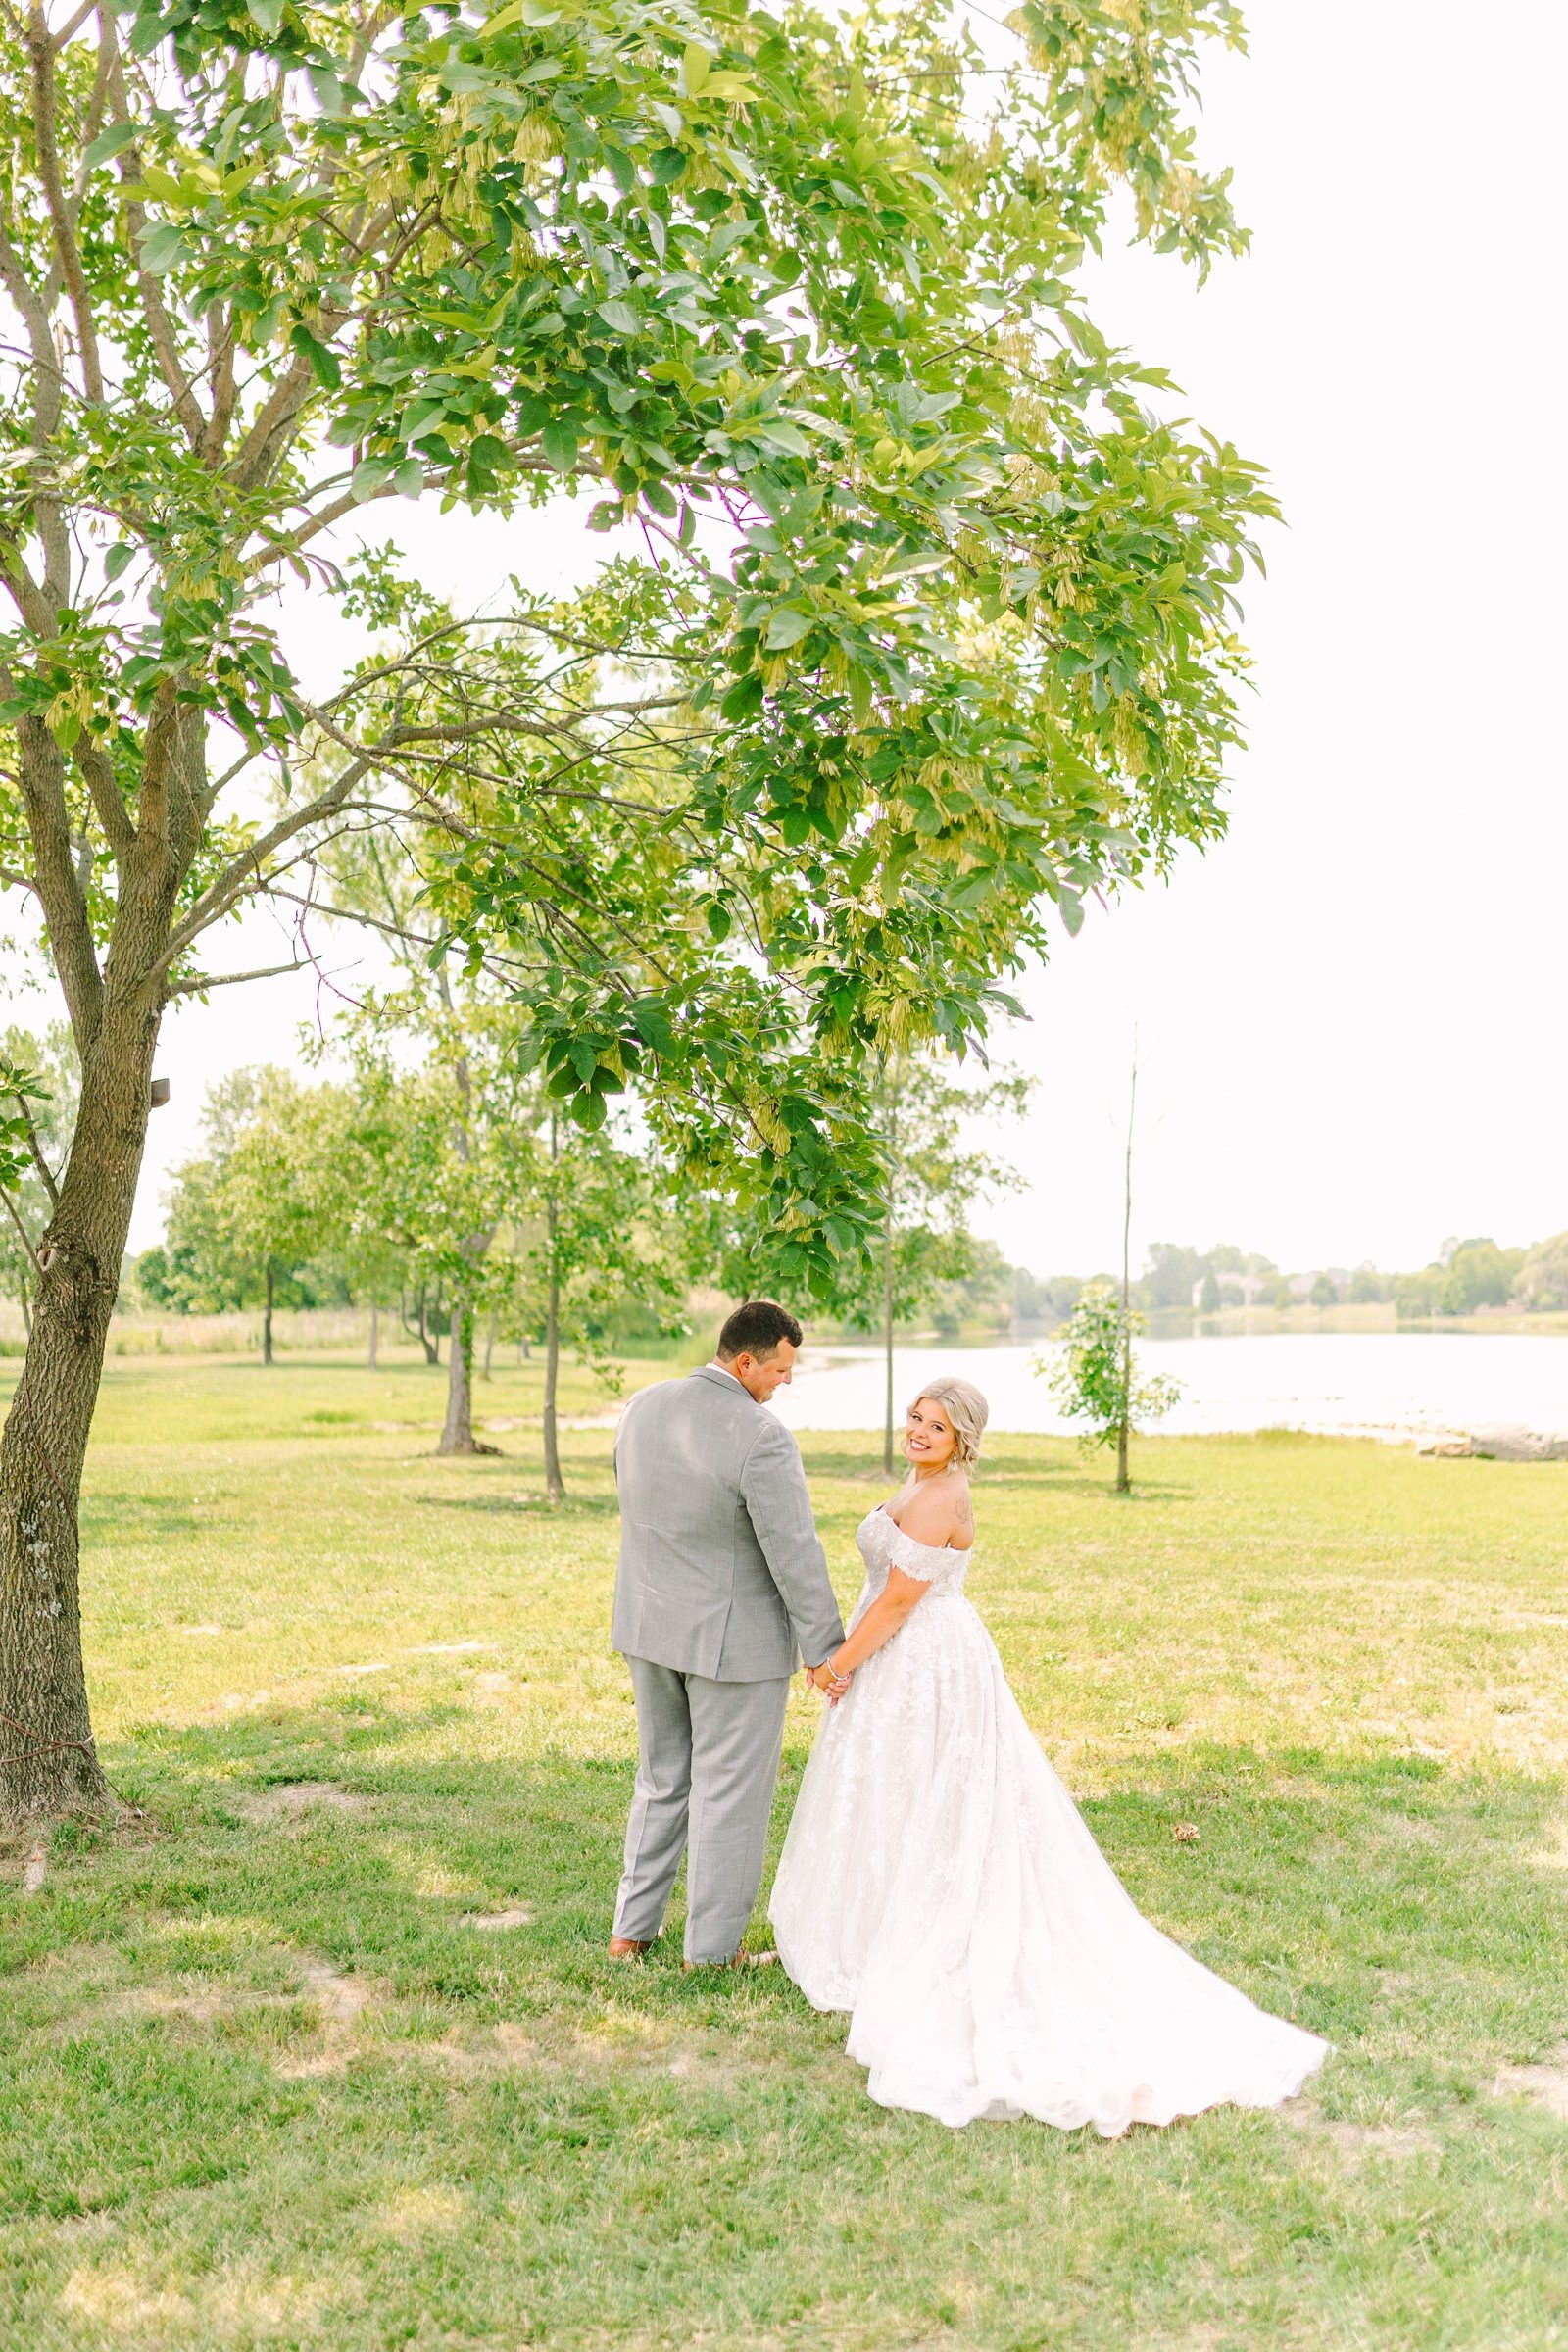 A Sunny Summer Wedding at Friedman Park in Newburgh Indiana | Paige and Dylan | Bret and Brandie Photography086.jpg